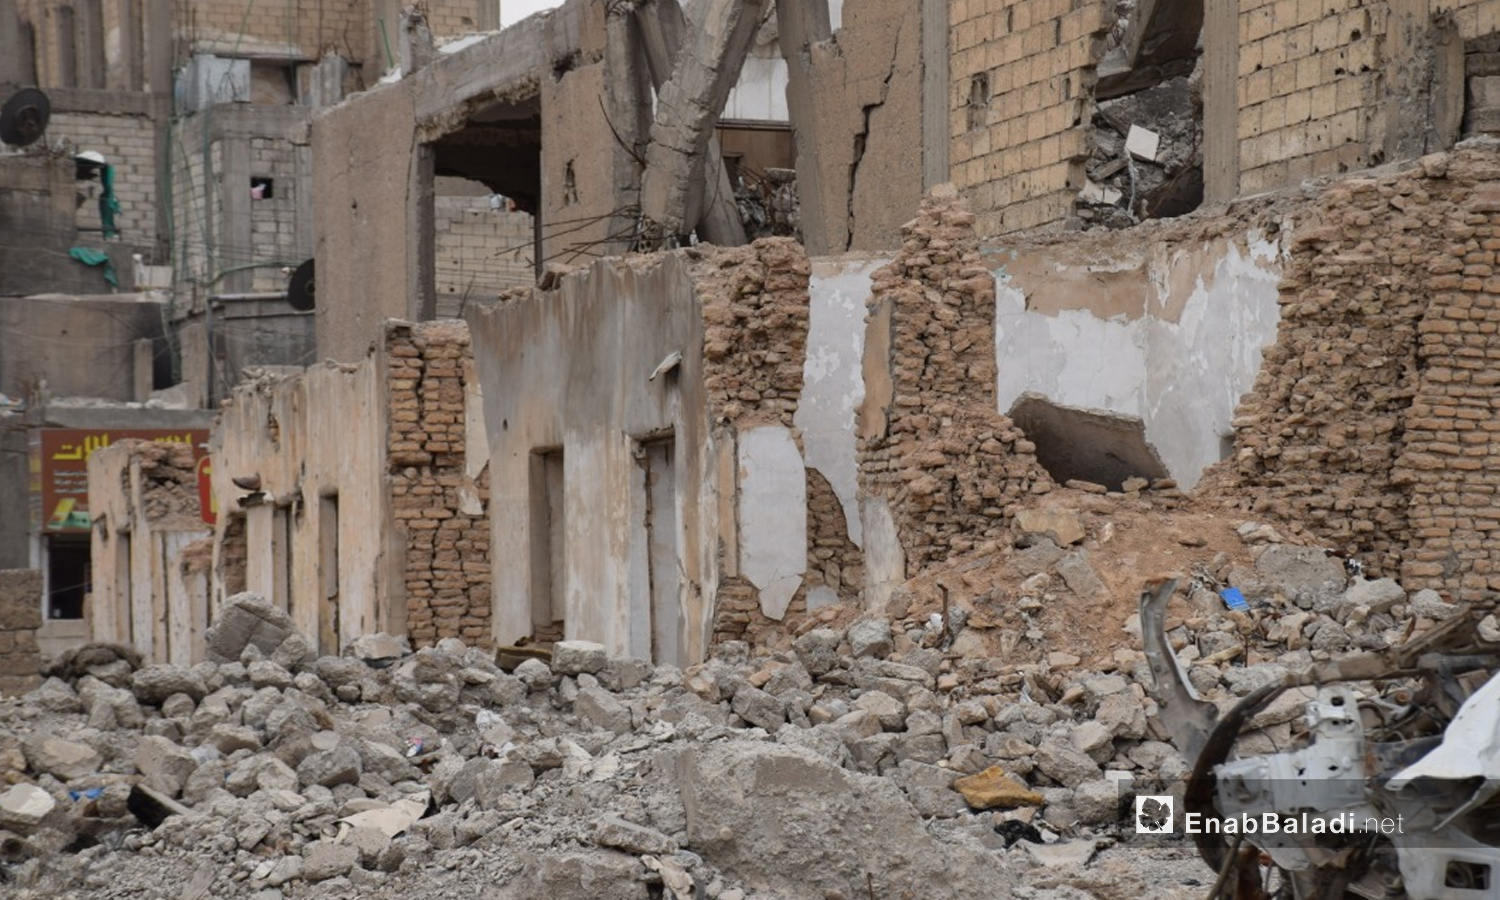 Rubble of old mud-brick houses in al-Raqqa destroyed by the hostilities between the Islamic State (IS), the Syrian Democratic Forces (SDF), and the Global Coalition Against IS - May 2021 (Enab Baladi / Hussam al-Omar)